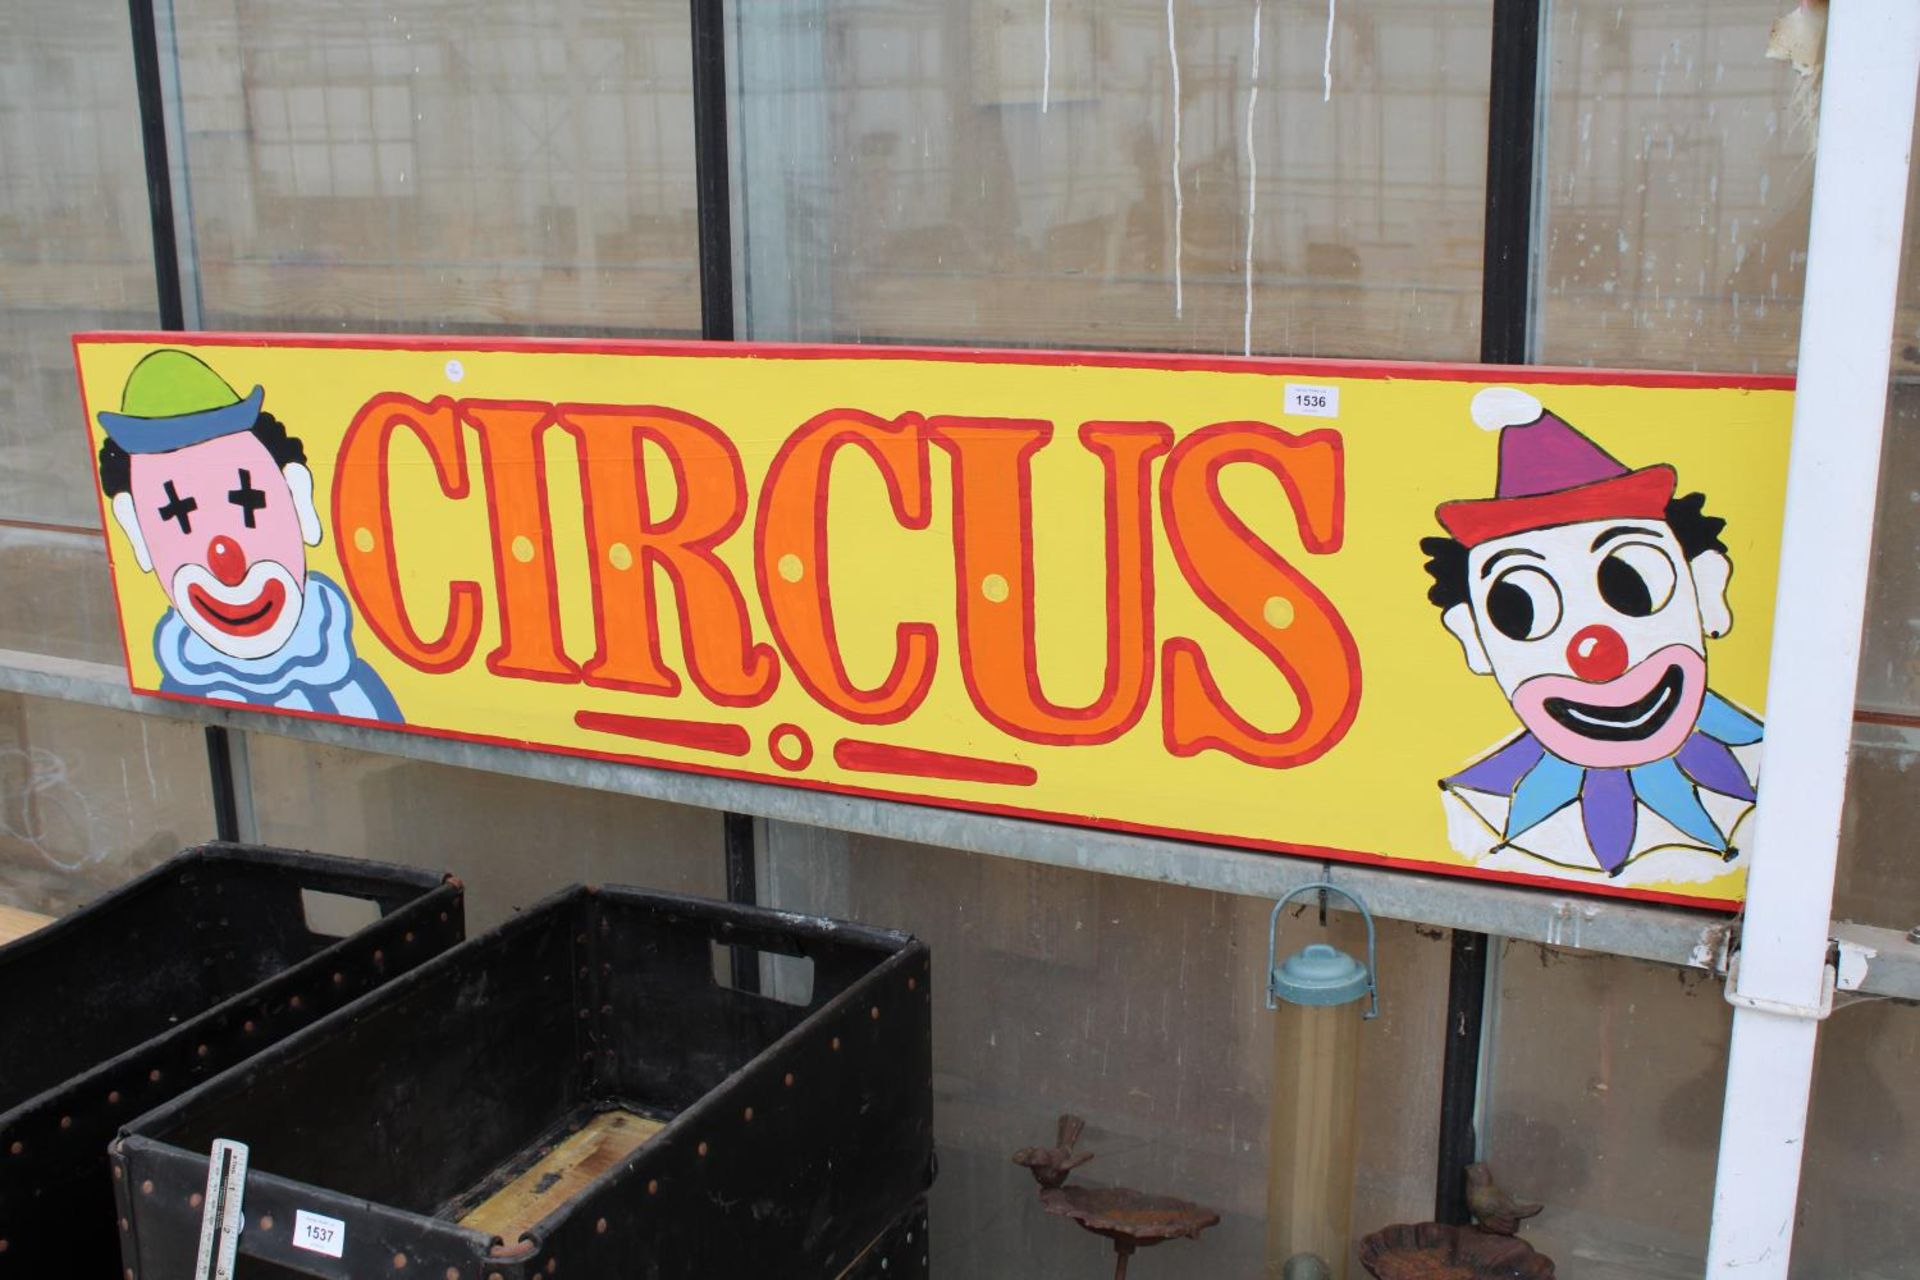 A WOODEN HAND PAINTED 'CIRCUS' SIGN